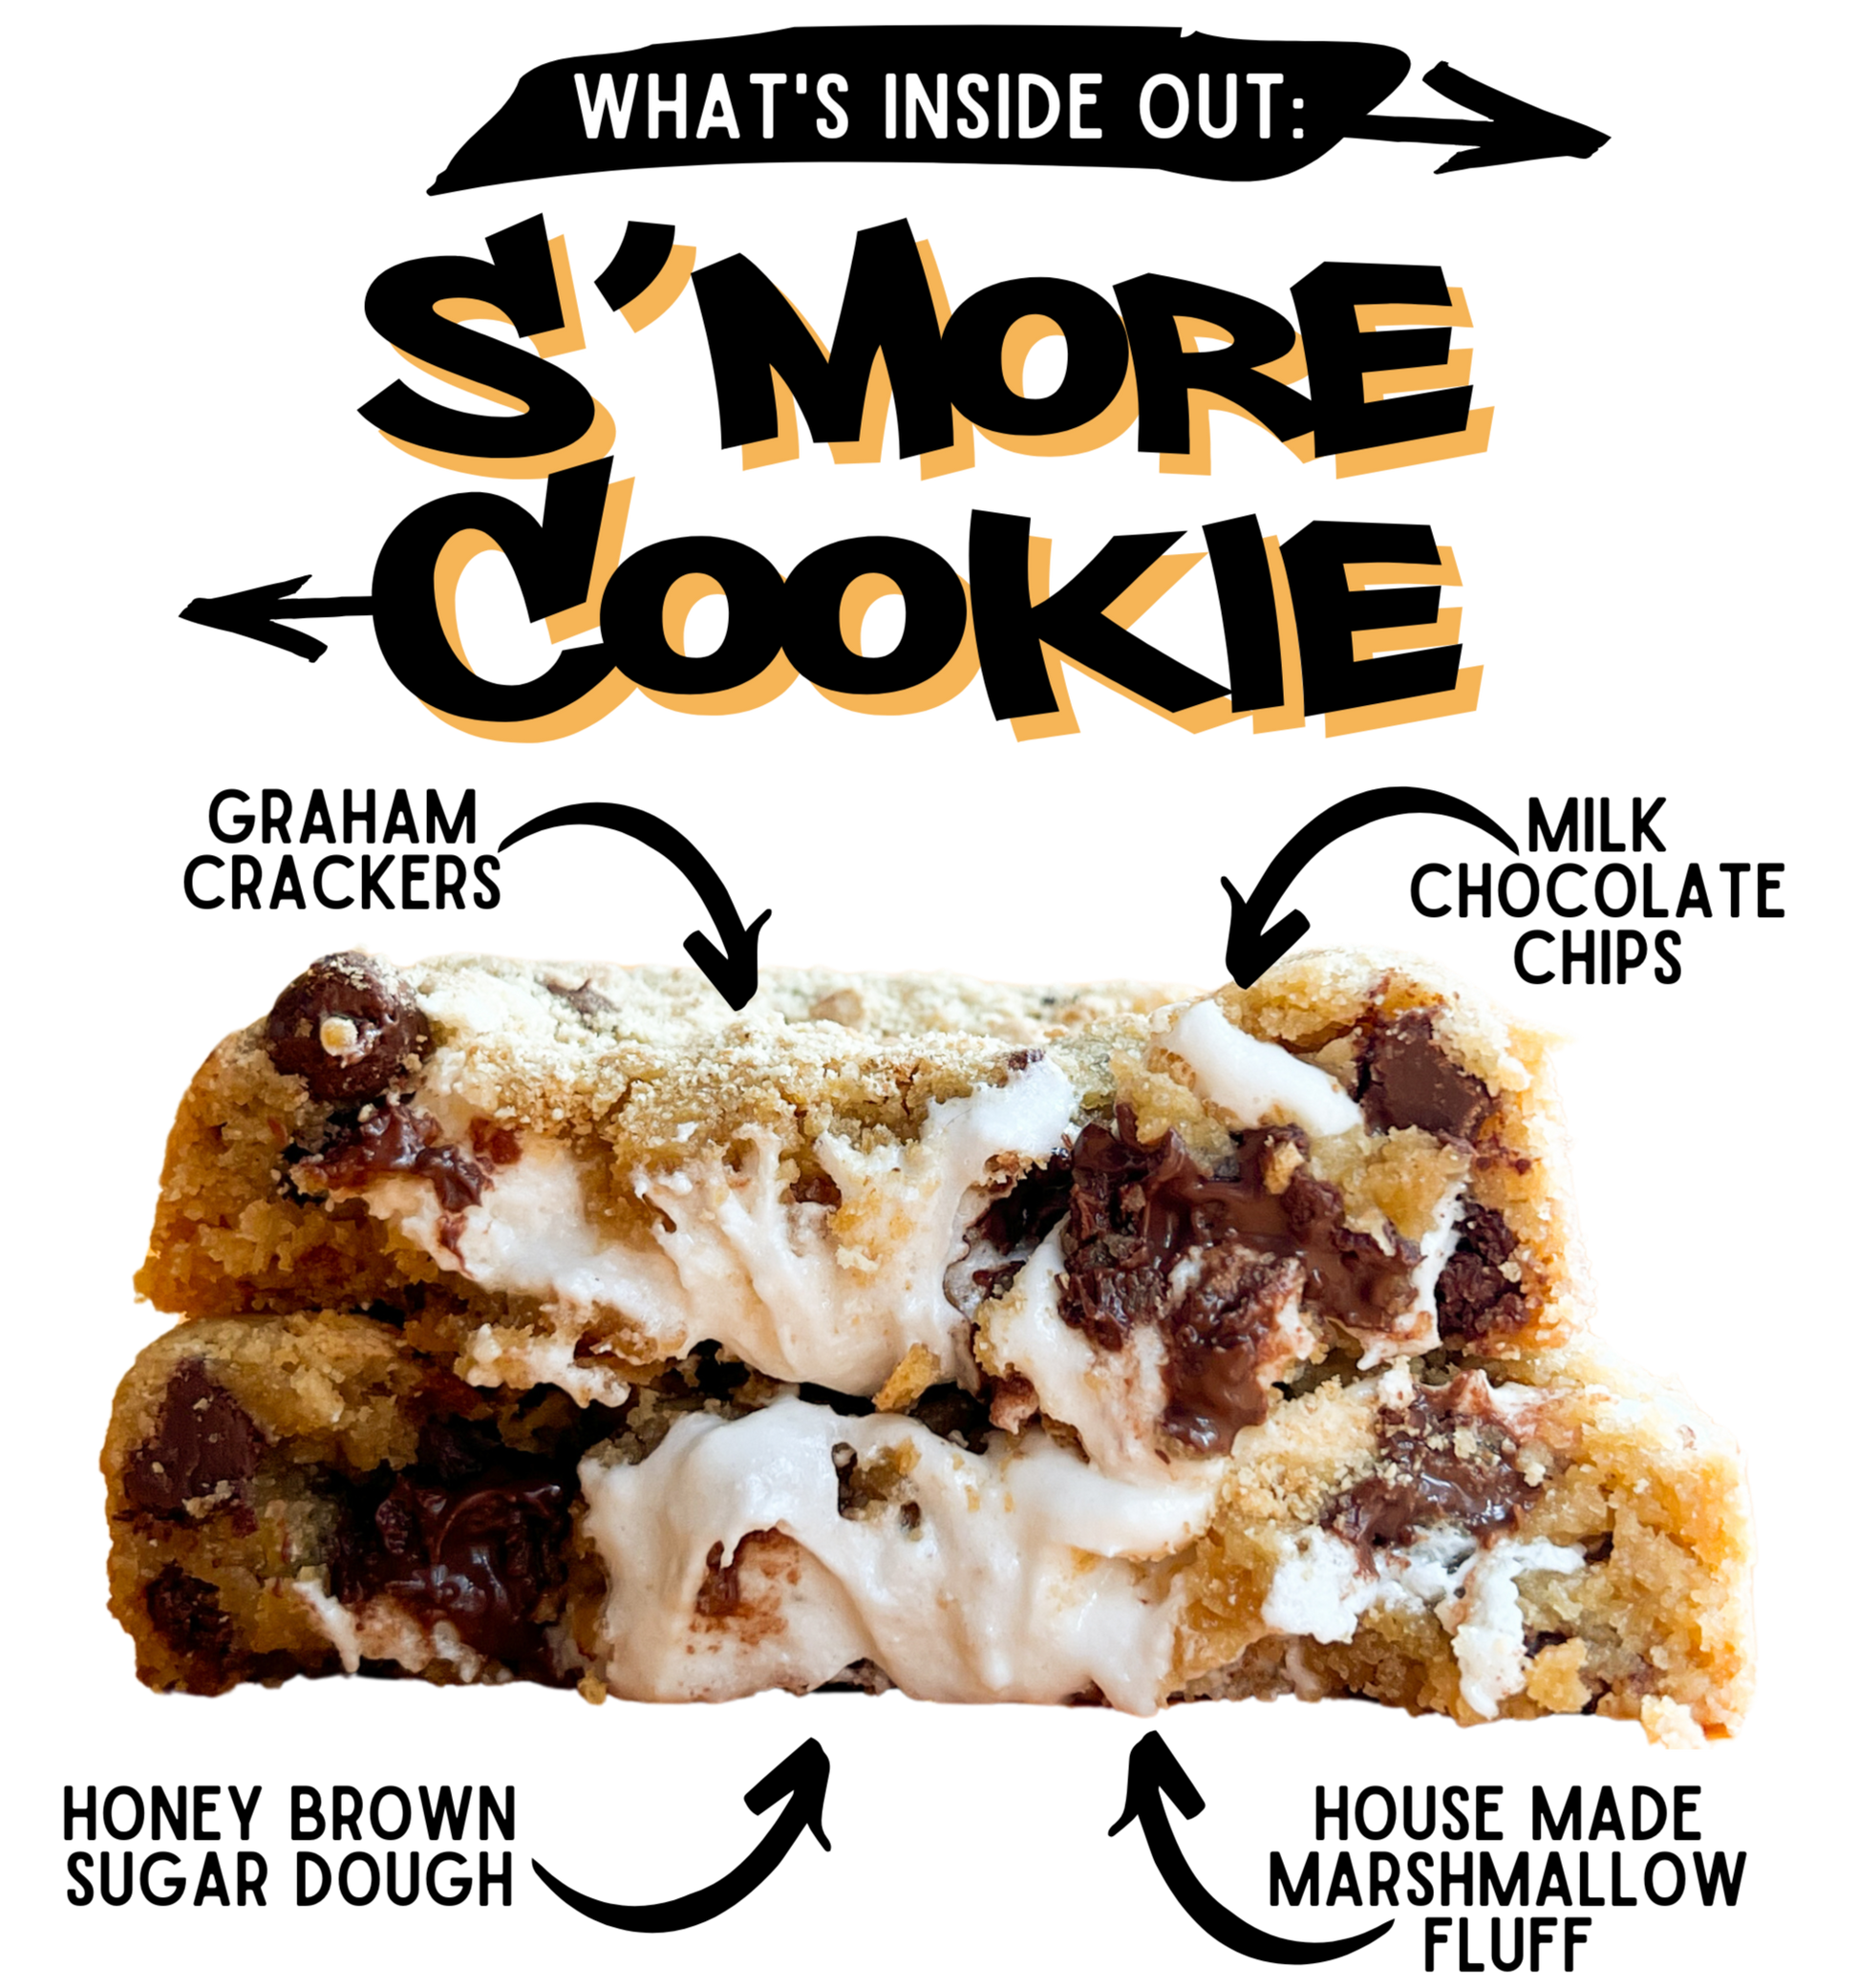 Inside Out Cookie Smore stuffed cookies